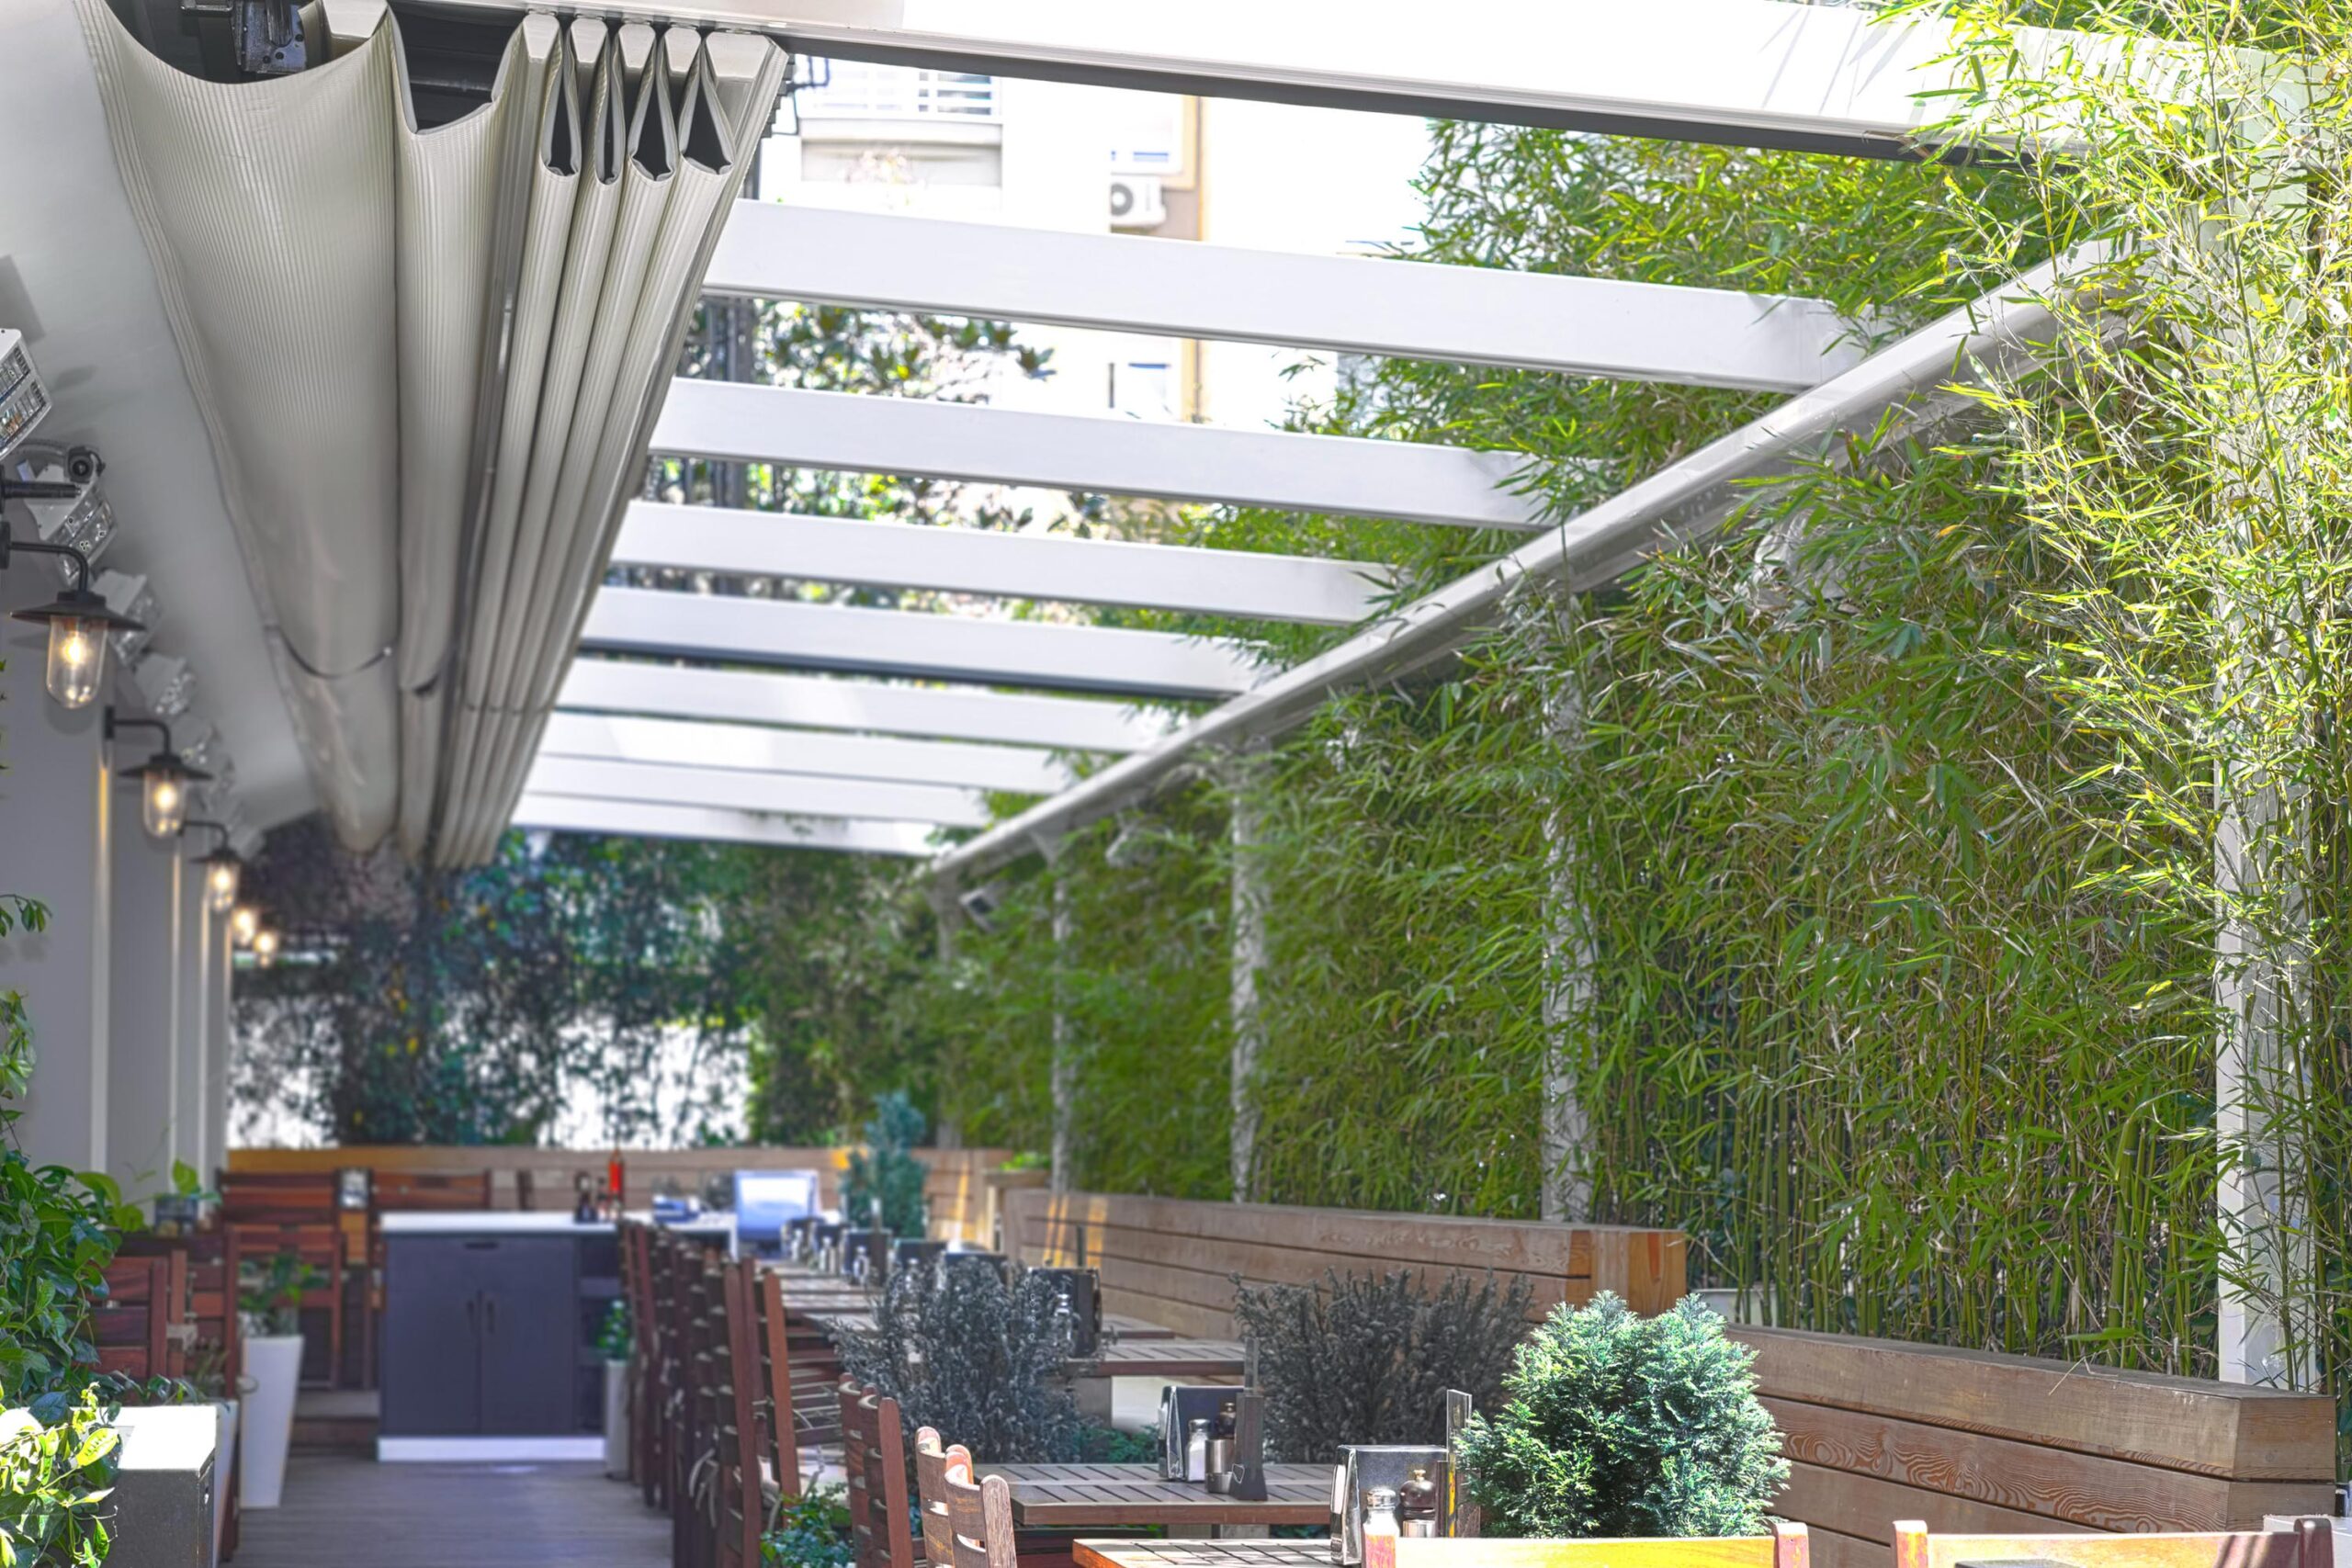 Contact Us - Ready For A Covered Patio? | Luxx Outdoor